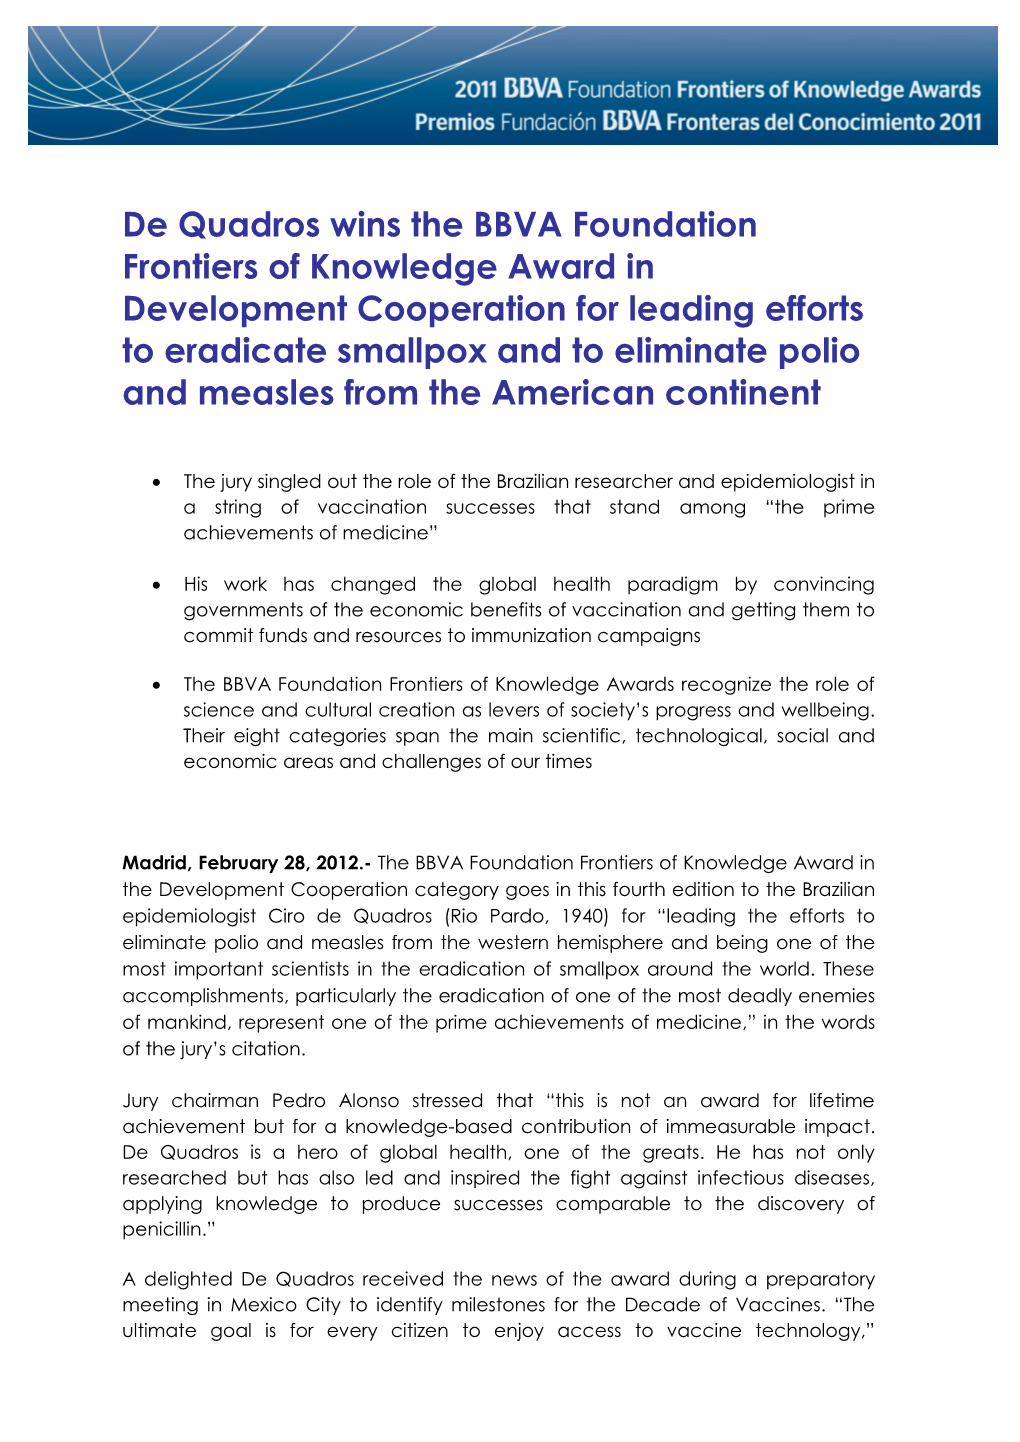 De Quadros Wins the BBVA Foundation Frontiers of Knowledge Award in Development Cooperation for Leading Efforts to Eradicate